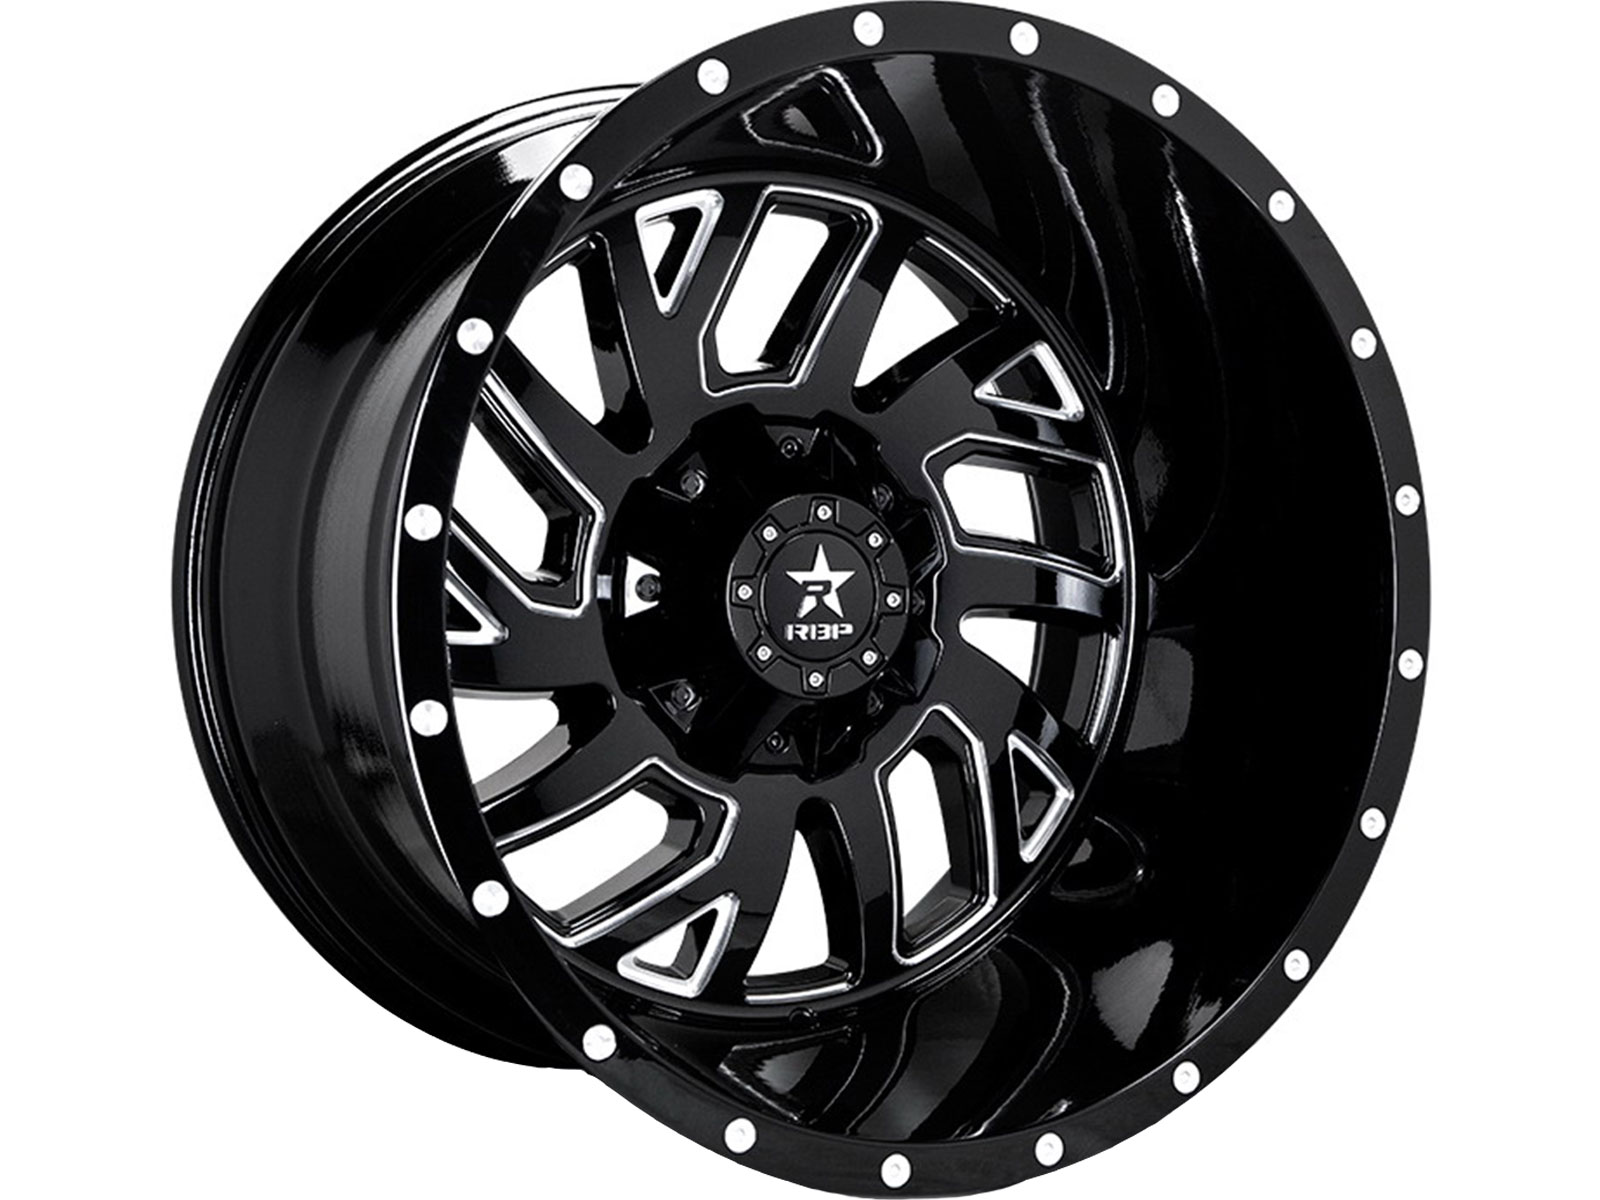 20 x 10. inches /5 x 150 mm, -19 mm Offset Dirty Life ROADKILL Matte Black/Black Beadlock Wheel with Painted Finish 